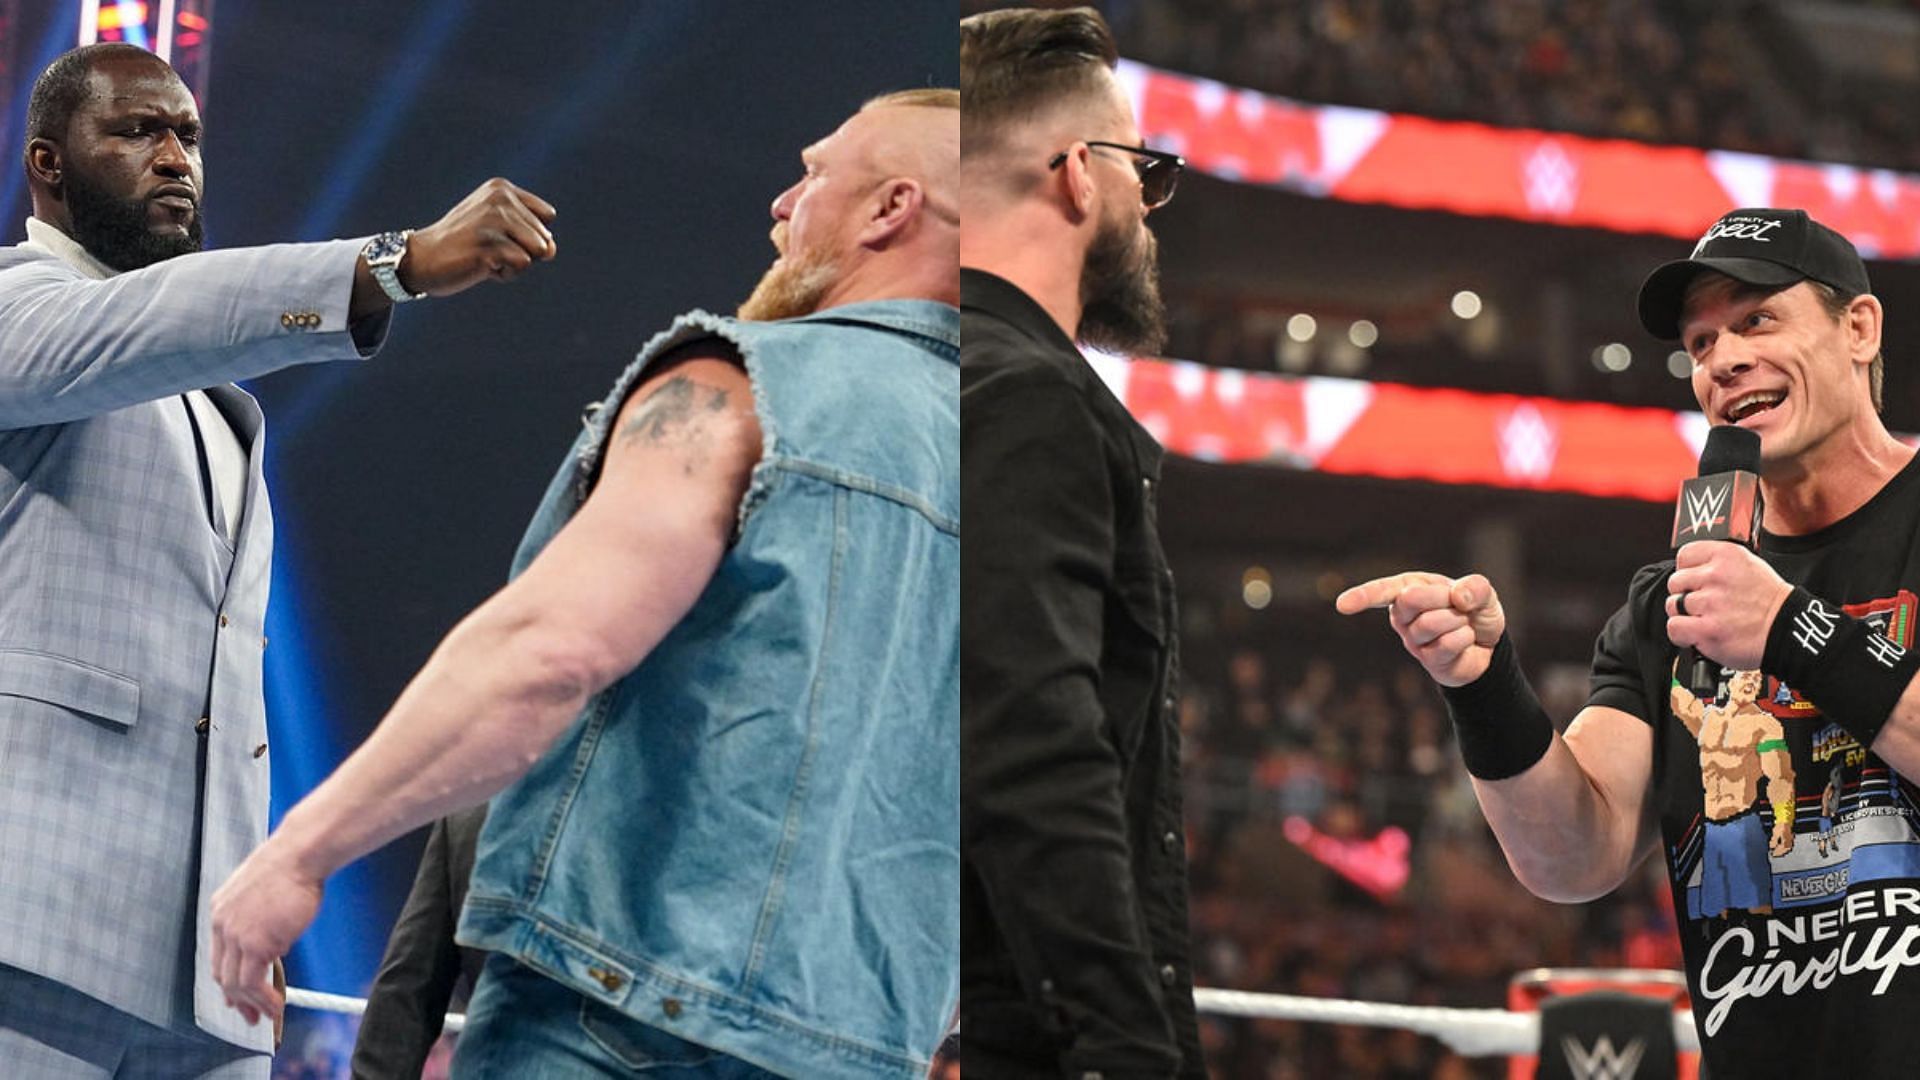 The writing is on the wall for some competitors at WrestleMania 39